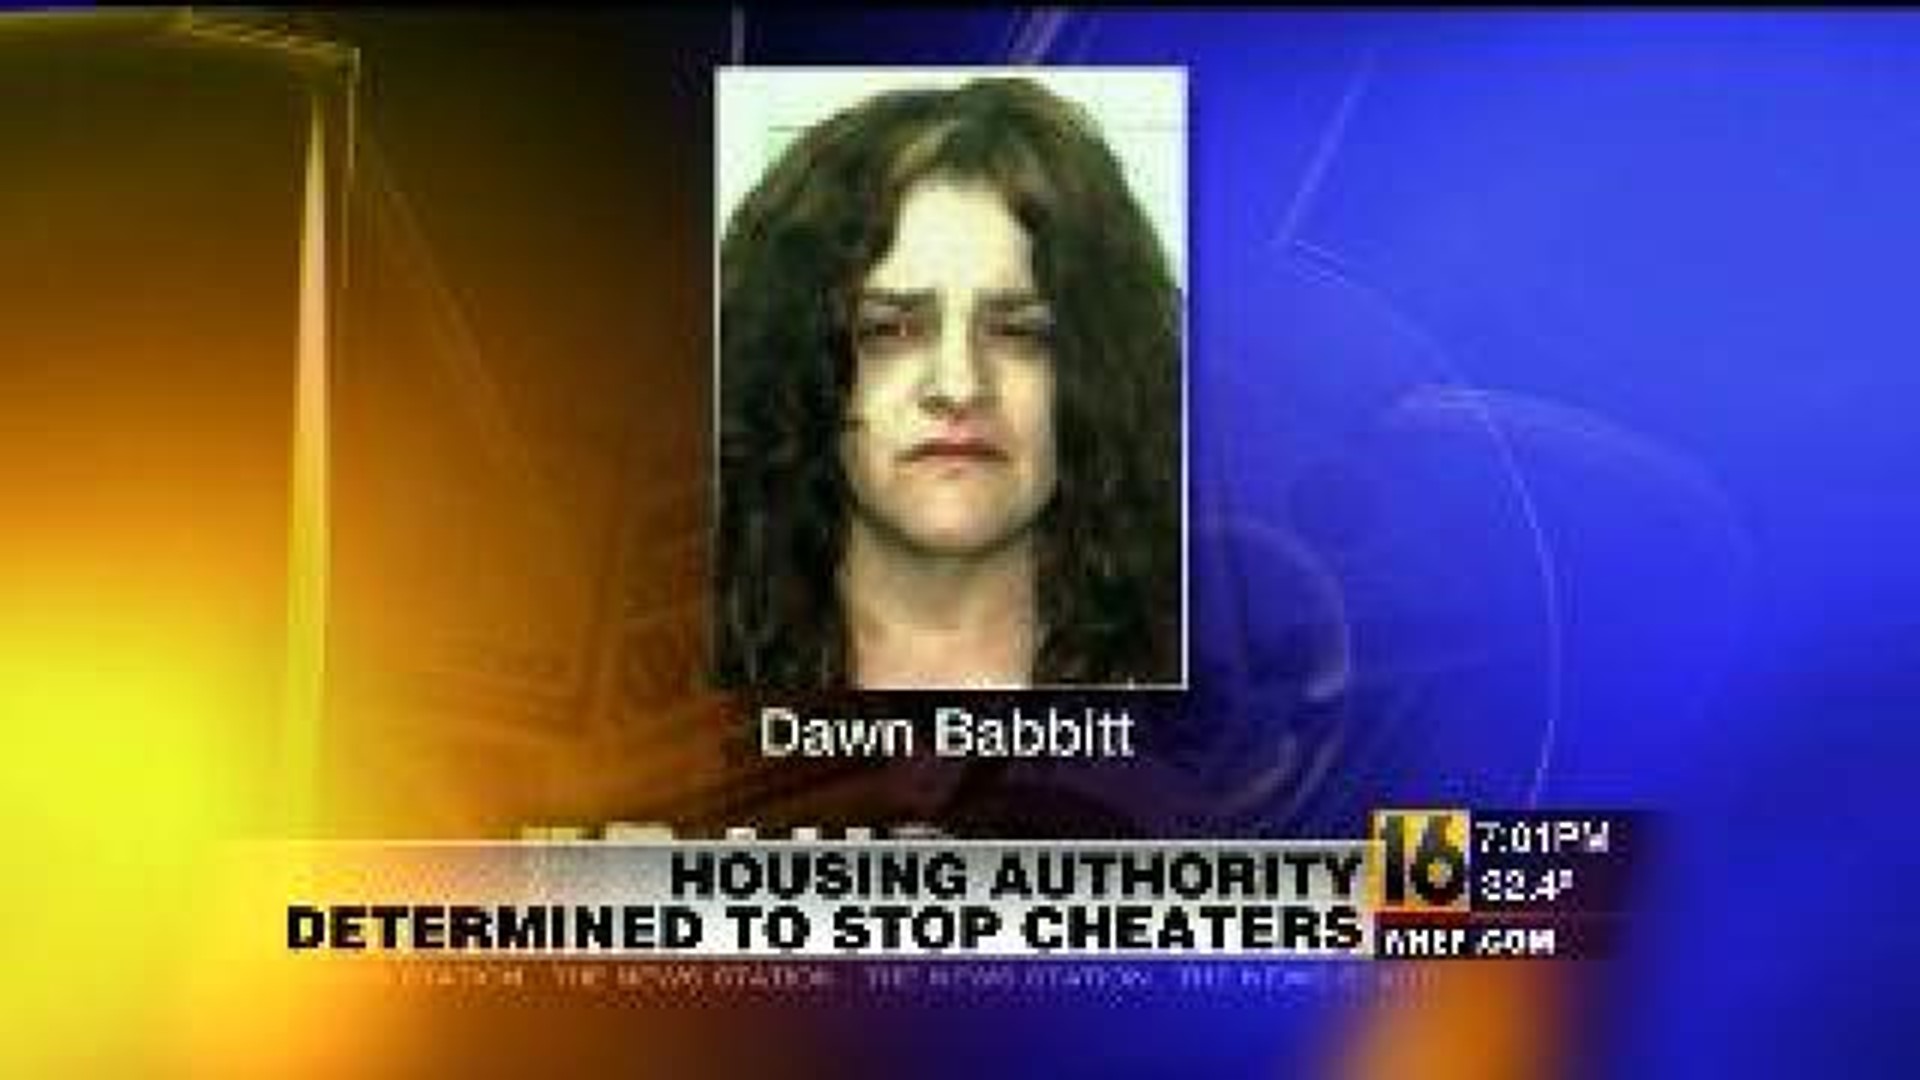 Housing Authority Determined to Stop Cheaters